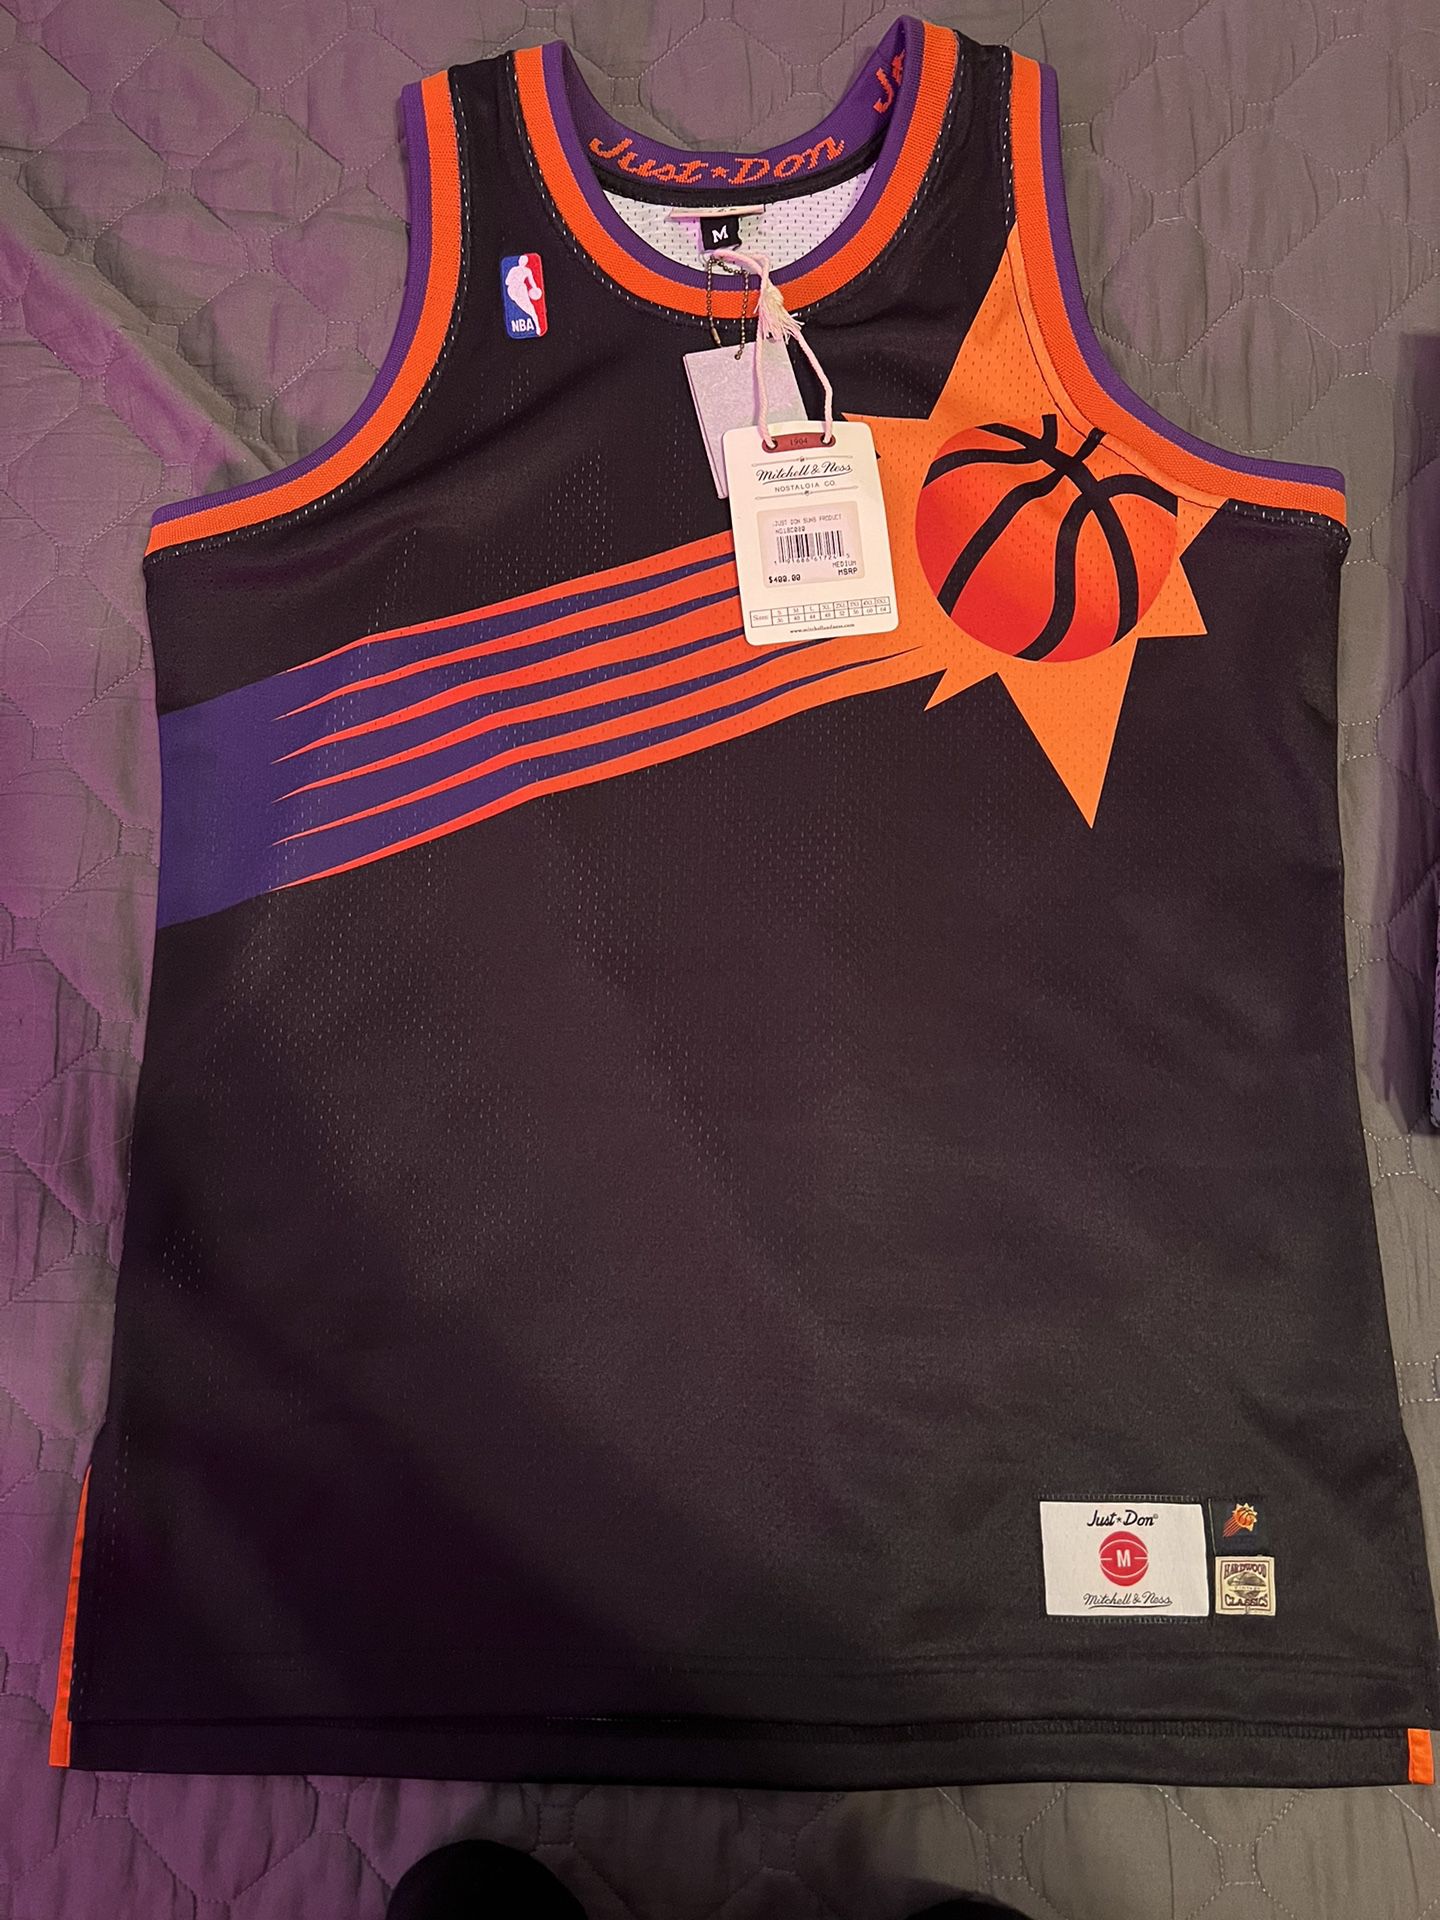 Authentic JUST DON X Mitchell & Ness Phoenix Suns Jersey for